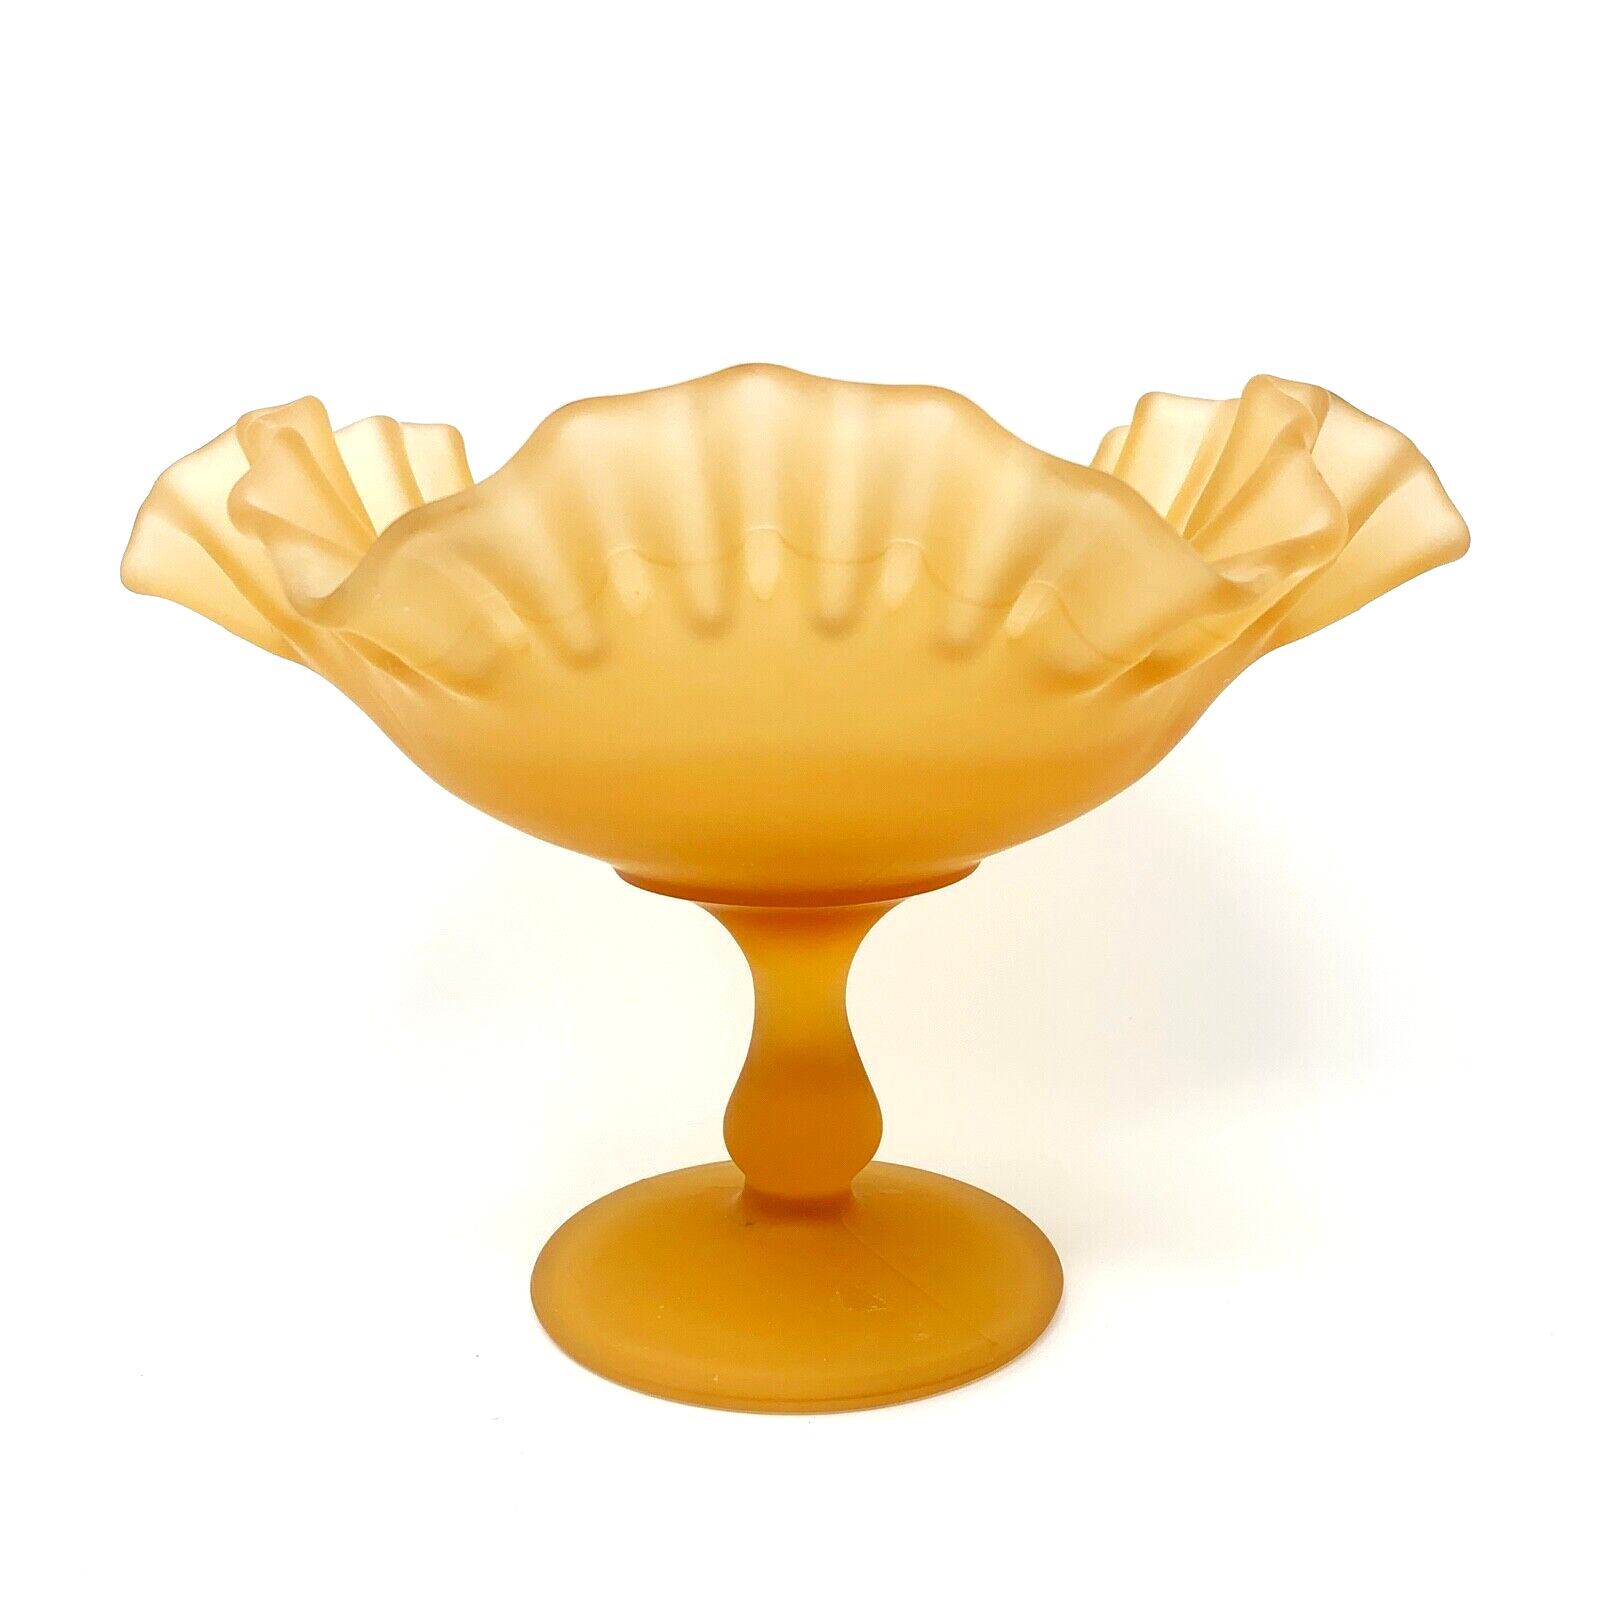 Peach Satin Glass Compote Ruffled Edge Footed Pedestal Bowl Candy Dish